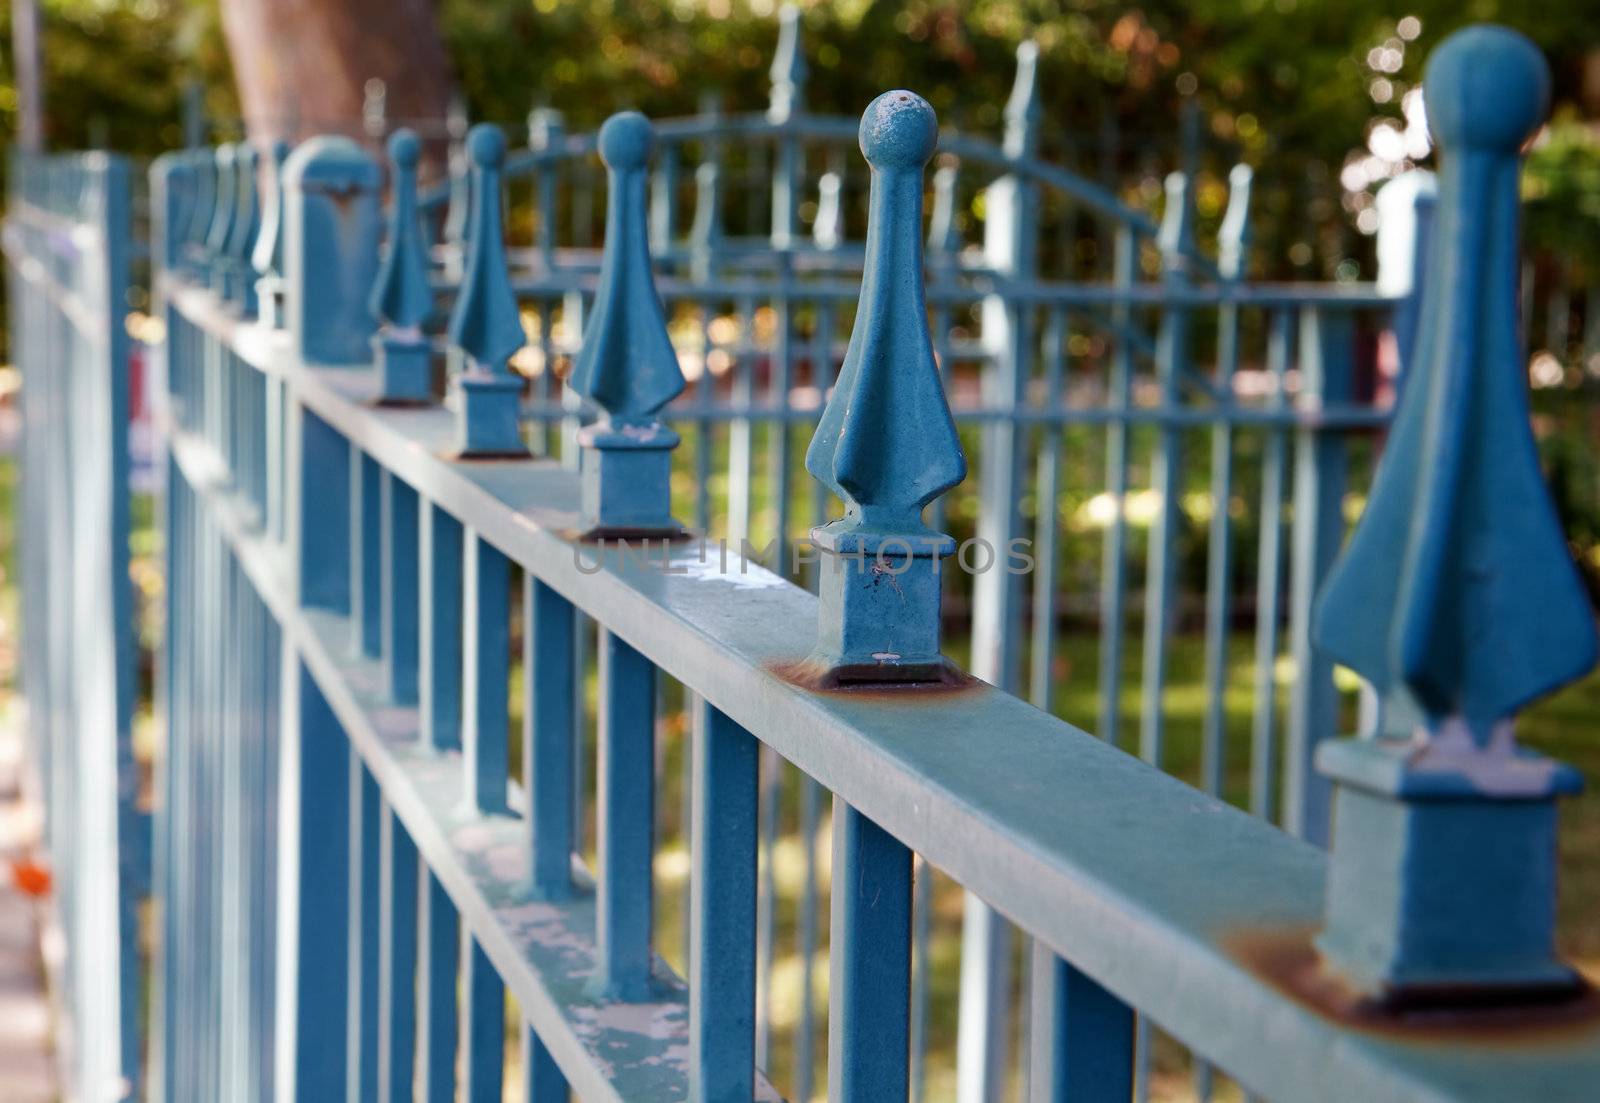 Blue metal spiked residential fence diminishing to soft focus in the distance